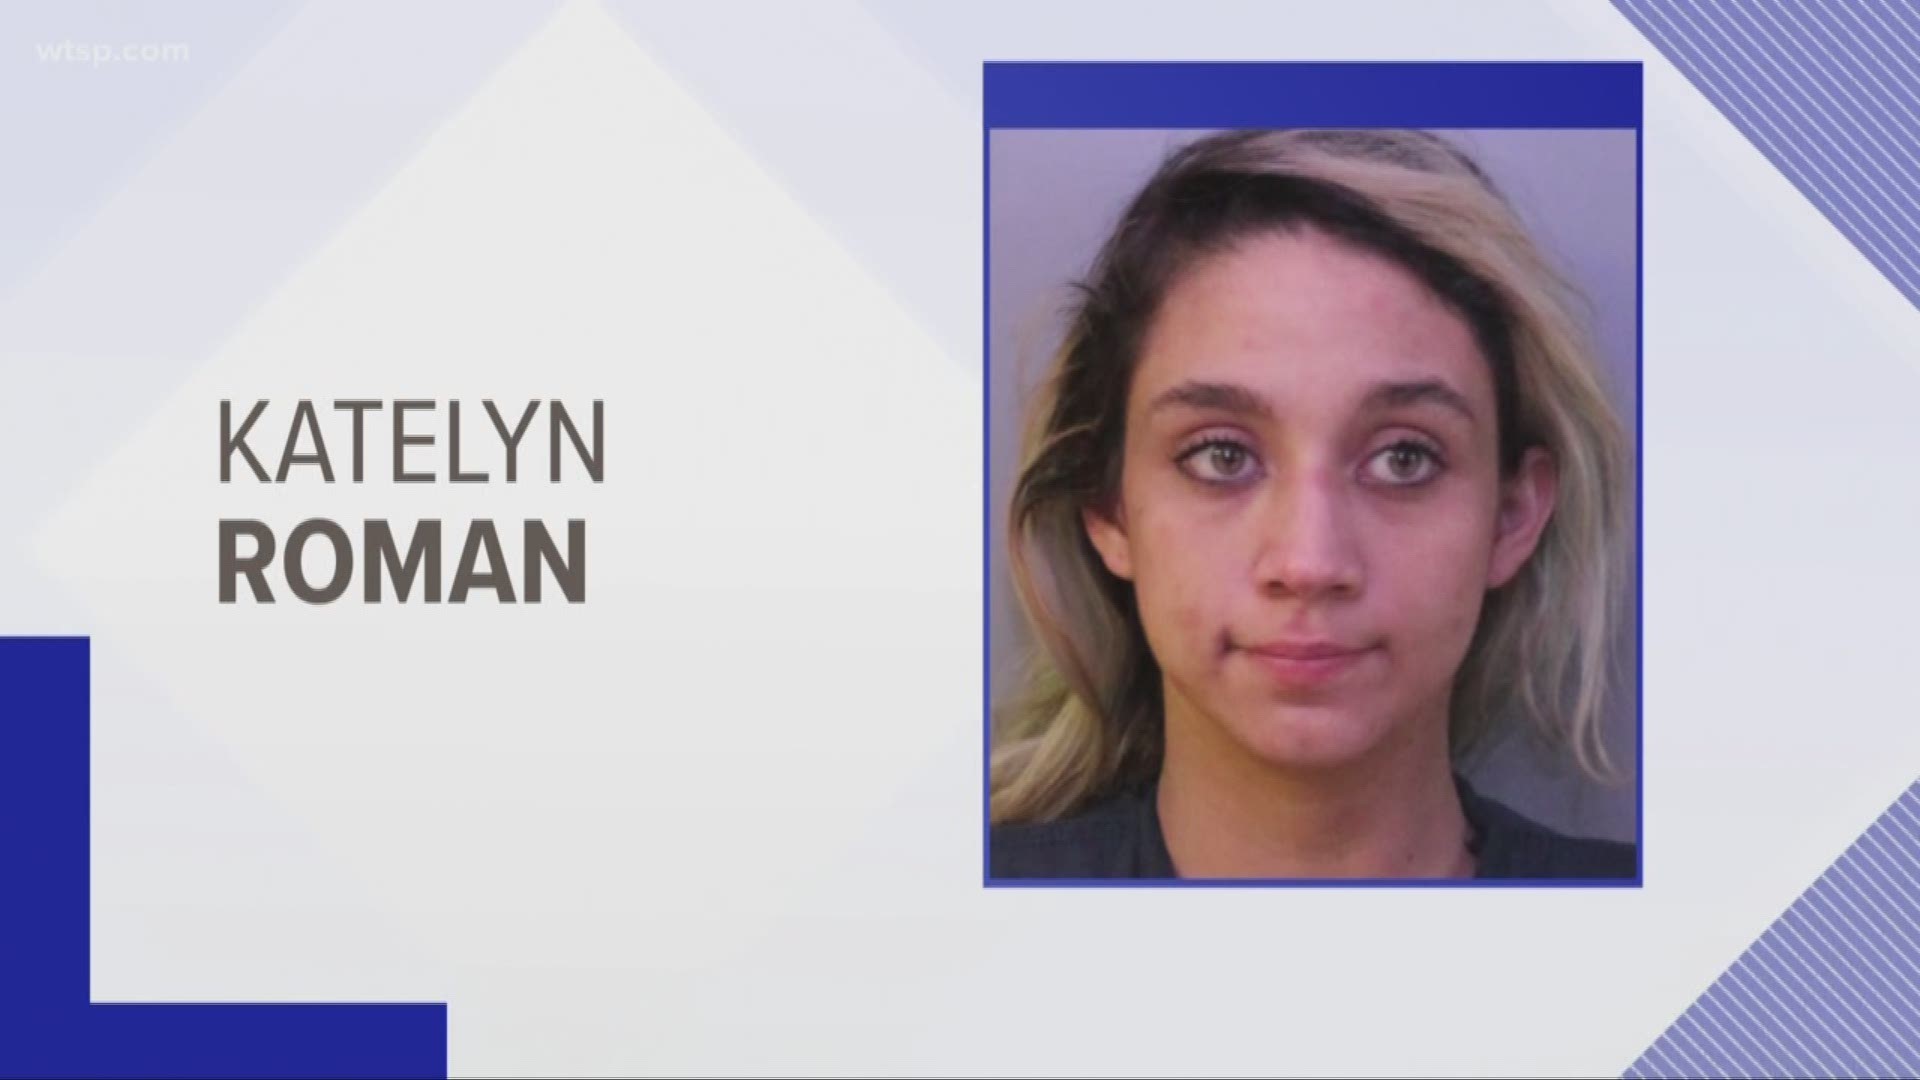 A Lakeland teen involved in a 2013 cyberbullying suicide case is behind bars in the Polk County Jail.

Arrest affidavits said Katelyn Candice Roman, 18, was arrested Tuesday after a 29-year-old man she was riding with led Polk County sheriff’s deputies on a high-speed chase in a stolen car.